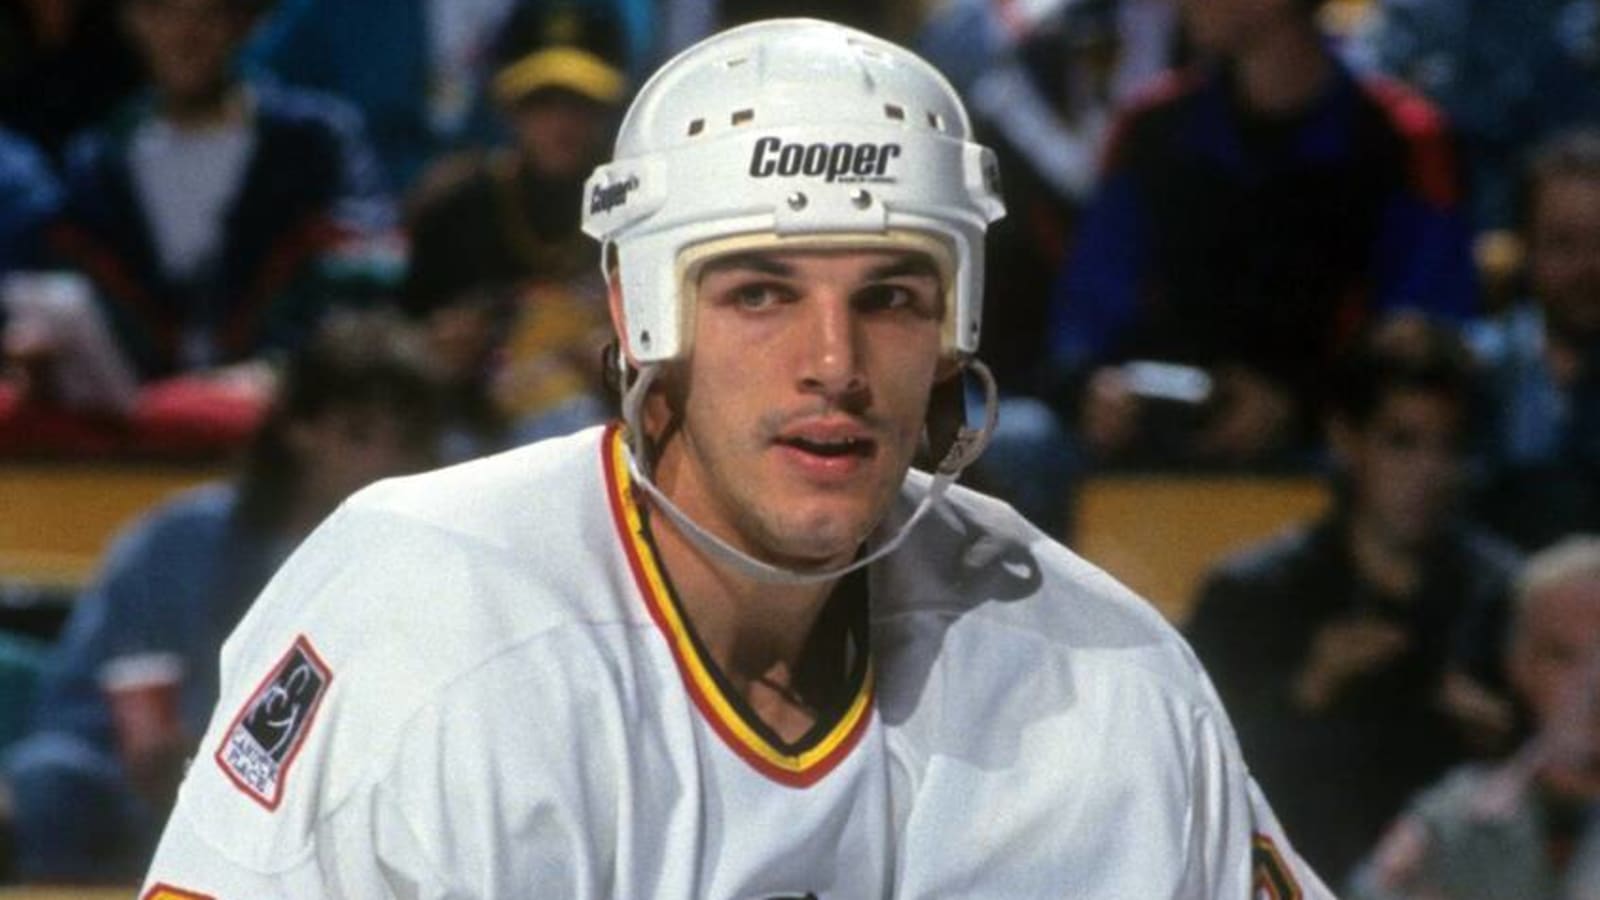 Global BC on X: Vancouver Canucks legend Gino Odjick's cousin has designed  a special jersey to honour the hockey player. Jay Odjick, an Indigenous  artist, spoke with @PaulHaysom about the process to